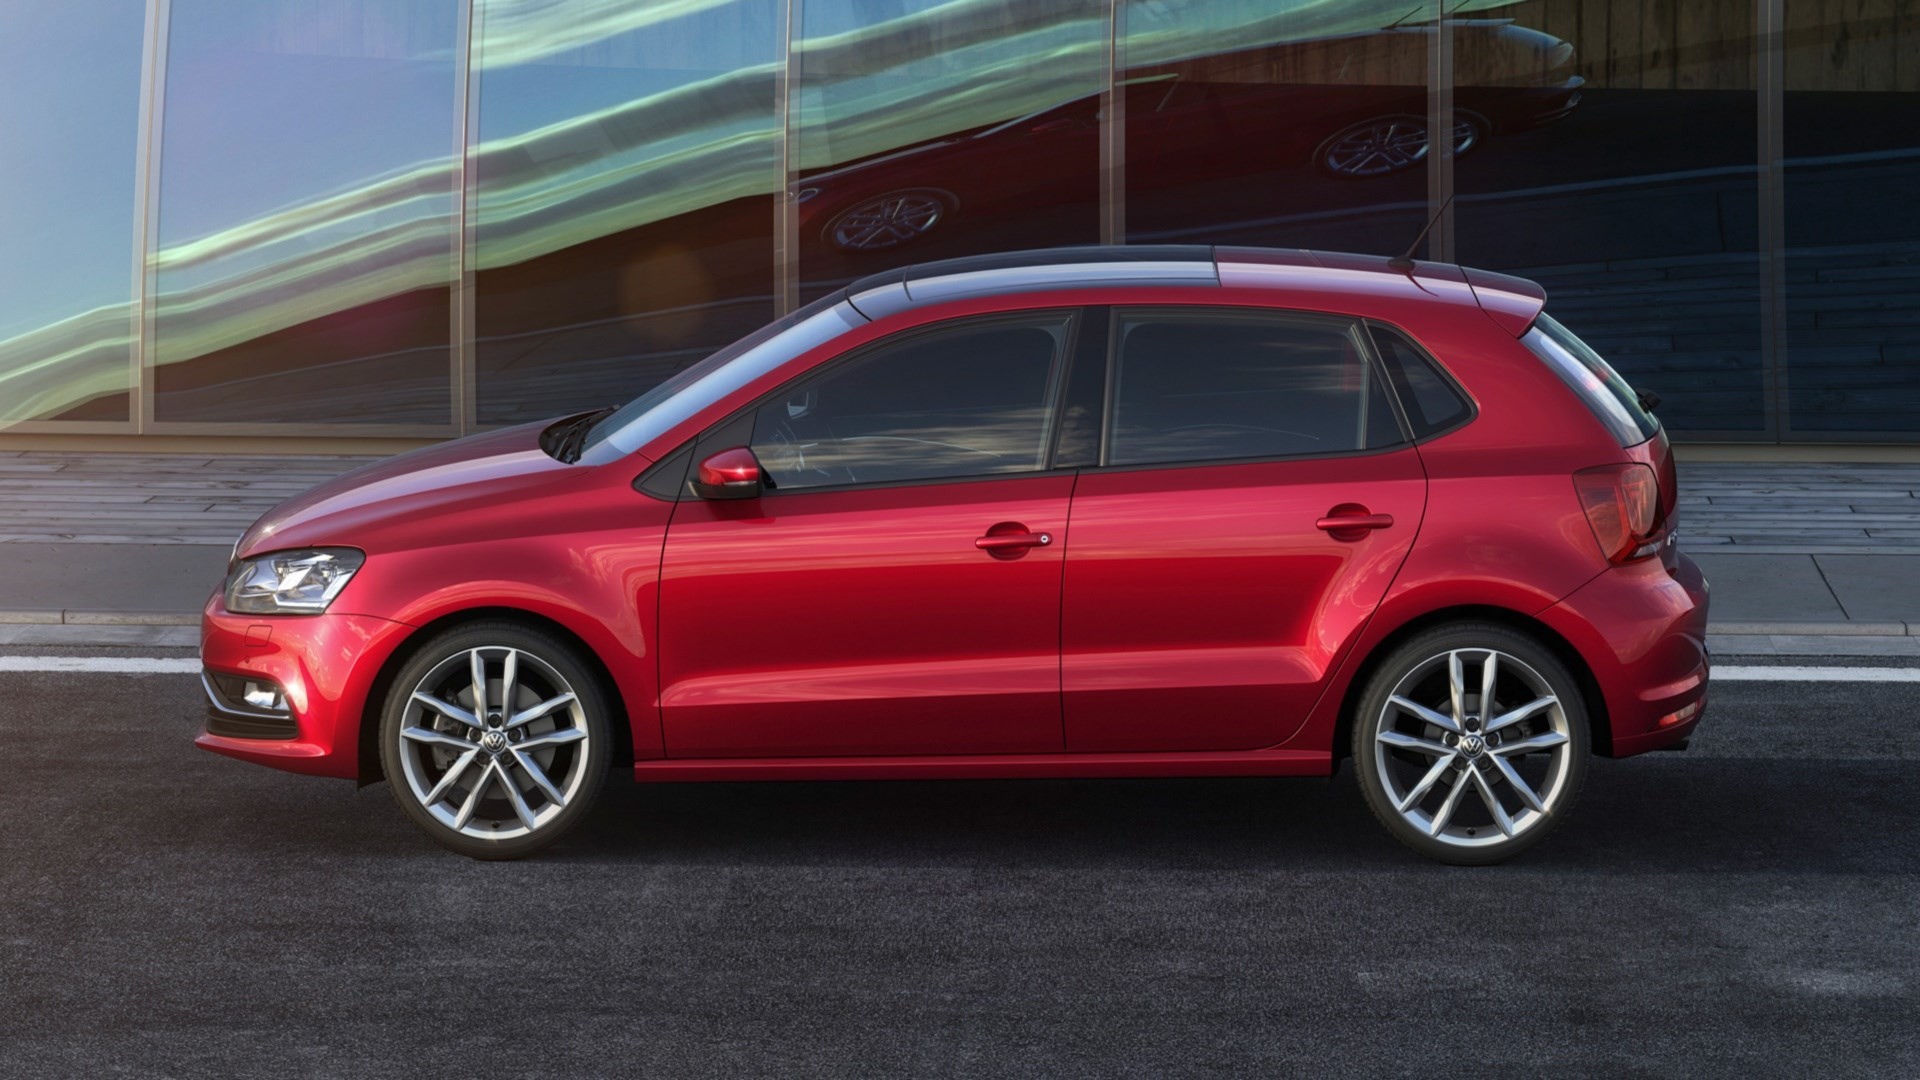 1920x1080  free screensaver wallpapers for volkswagen polo